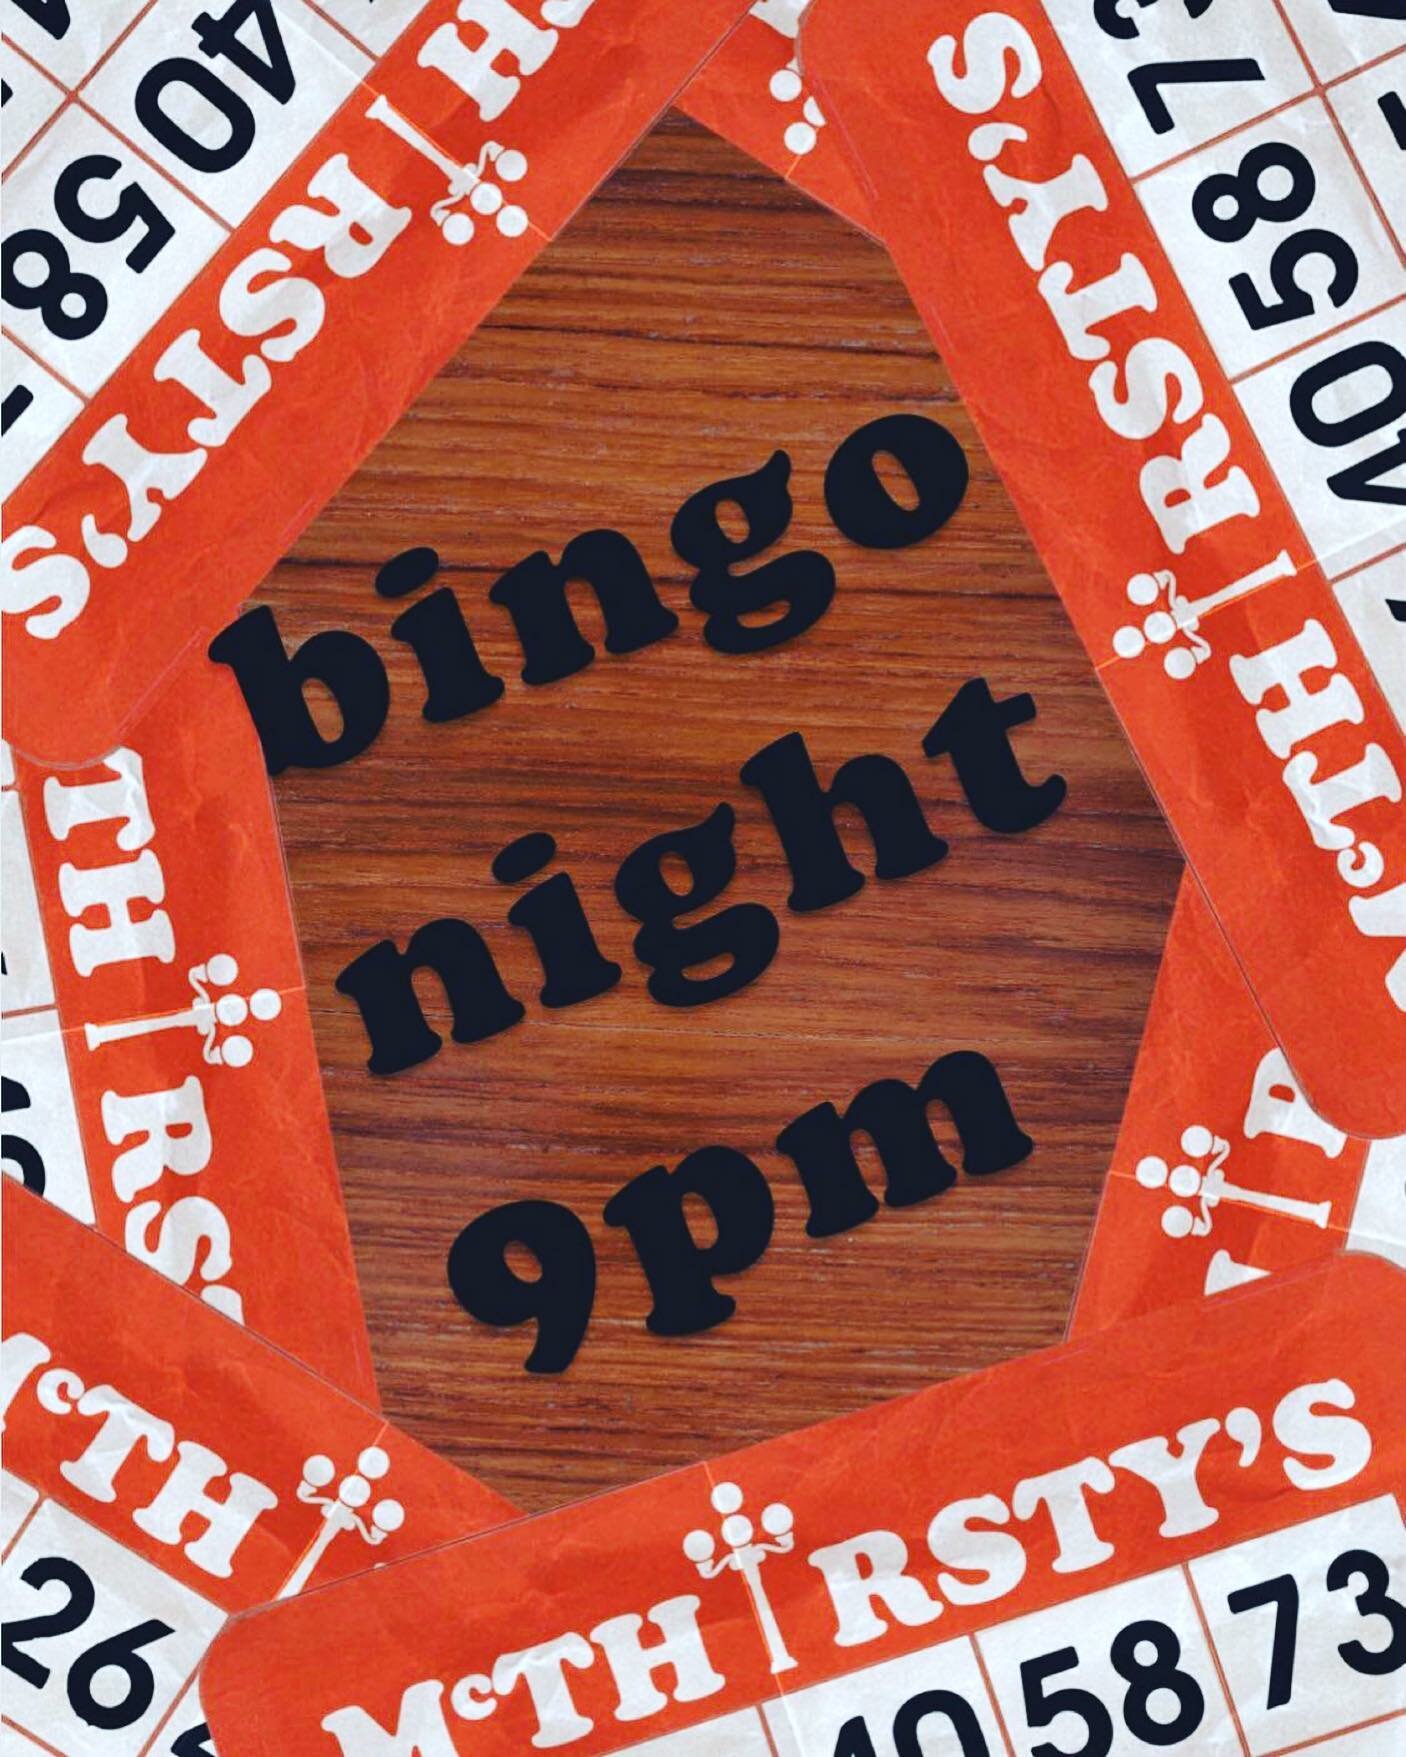 Get your grandma&rsquo;s bingo dabbers out of storage because McThirsty&rsquo;s bingo starts at 9pm tonight!